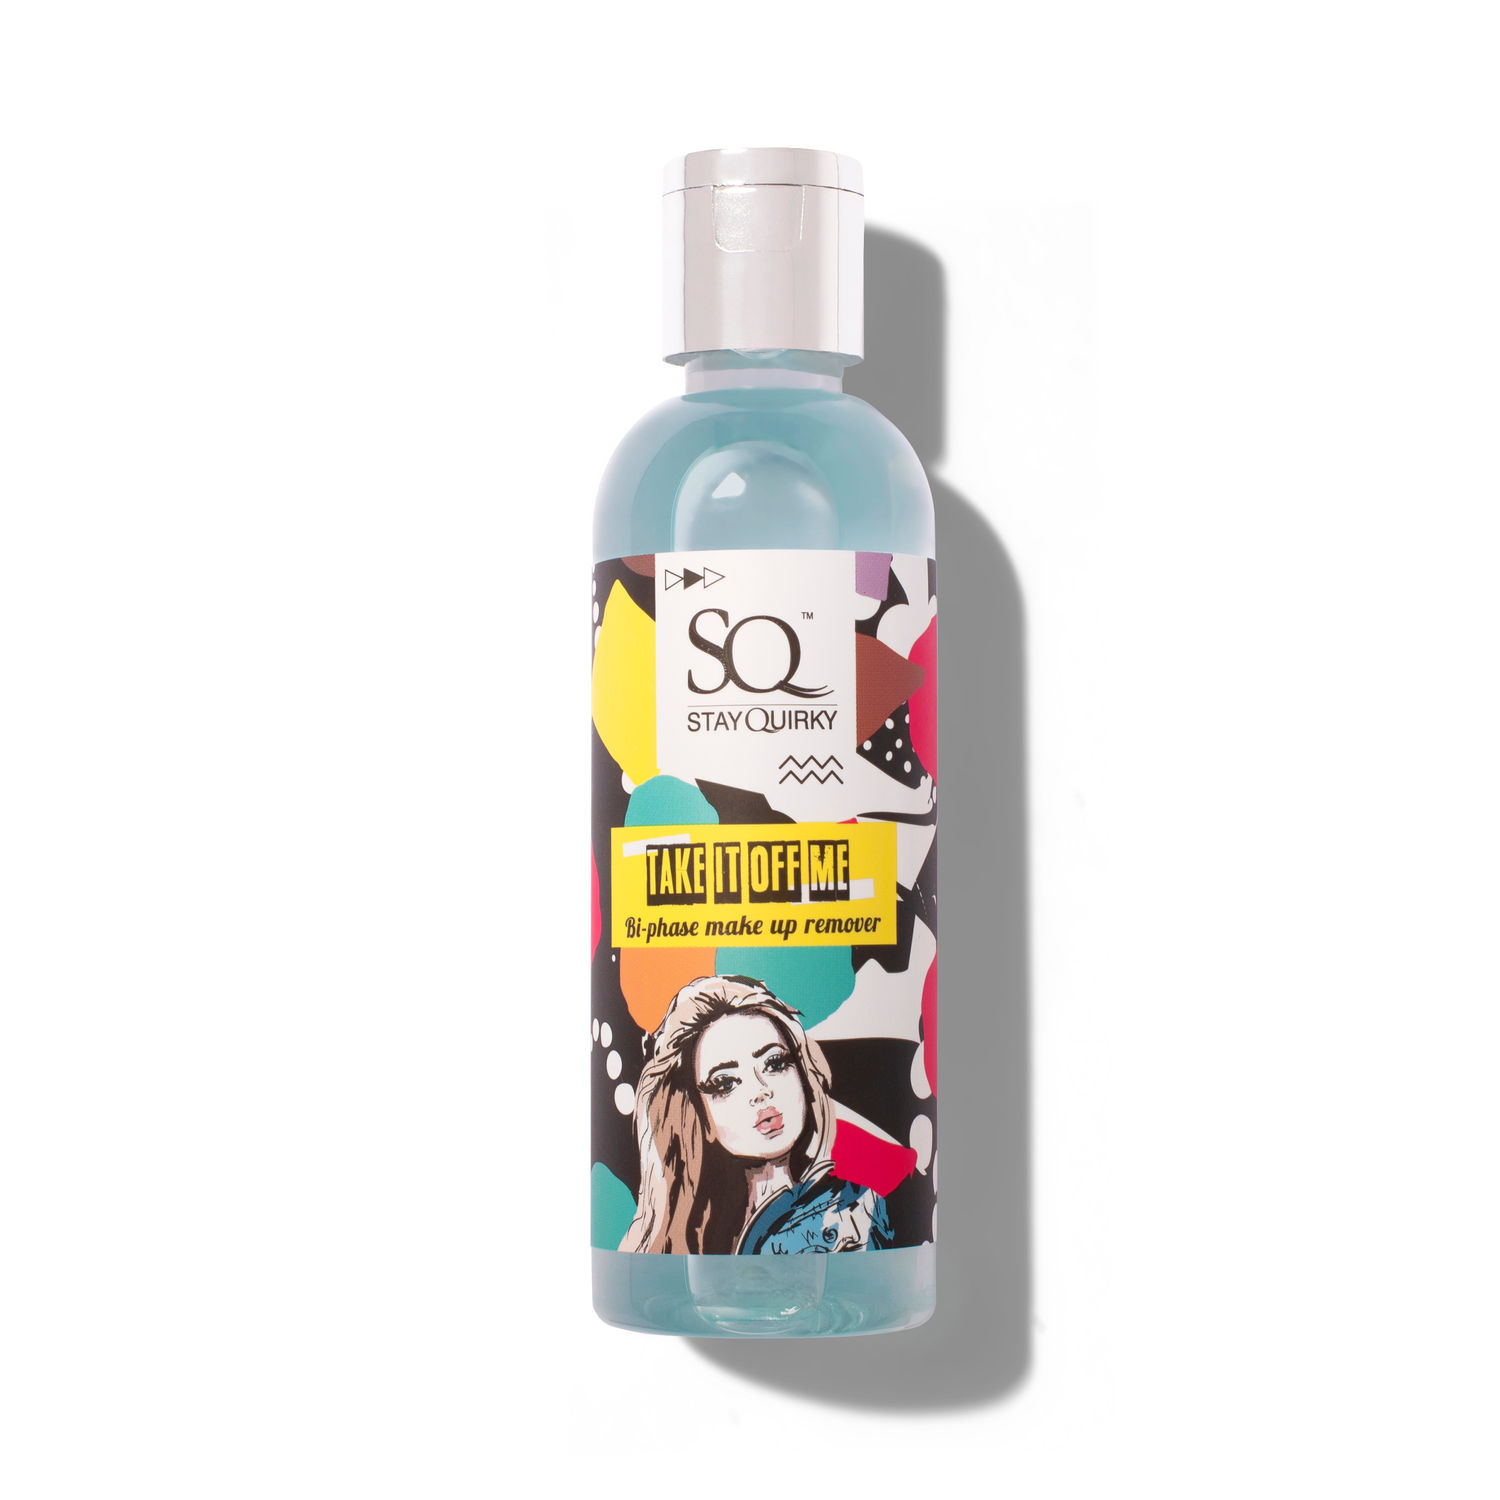 Buy Stay Quirky Bi-Phase Makeup Remover|Micellar Water- Take It Off Me (100 ml) - Purplle